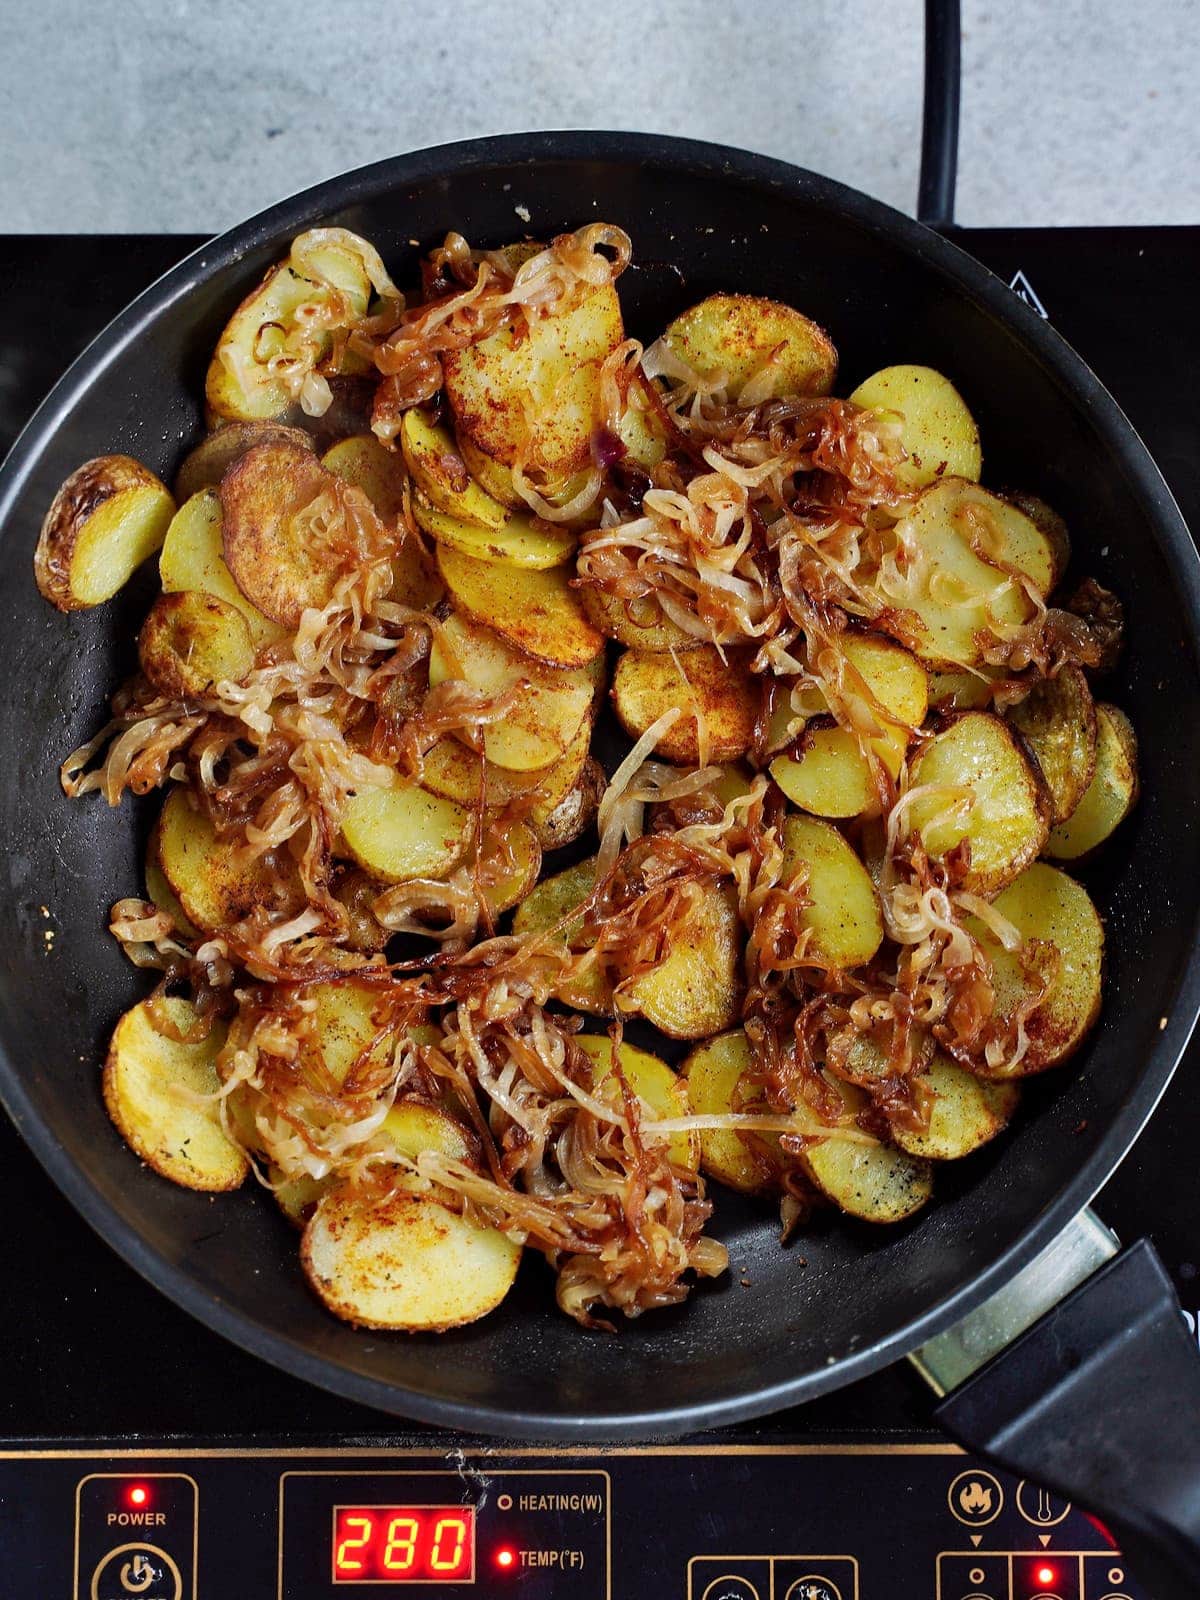 pan-fried potatoes and caramelized onions in black skillet